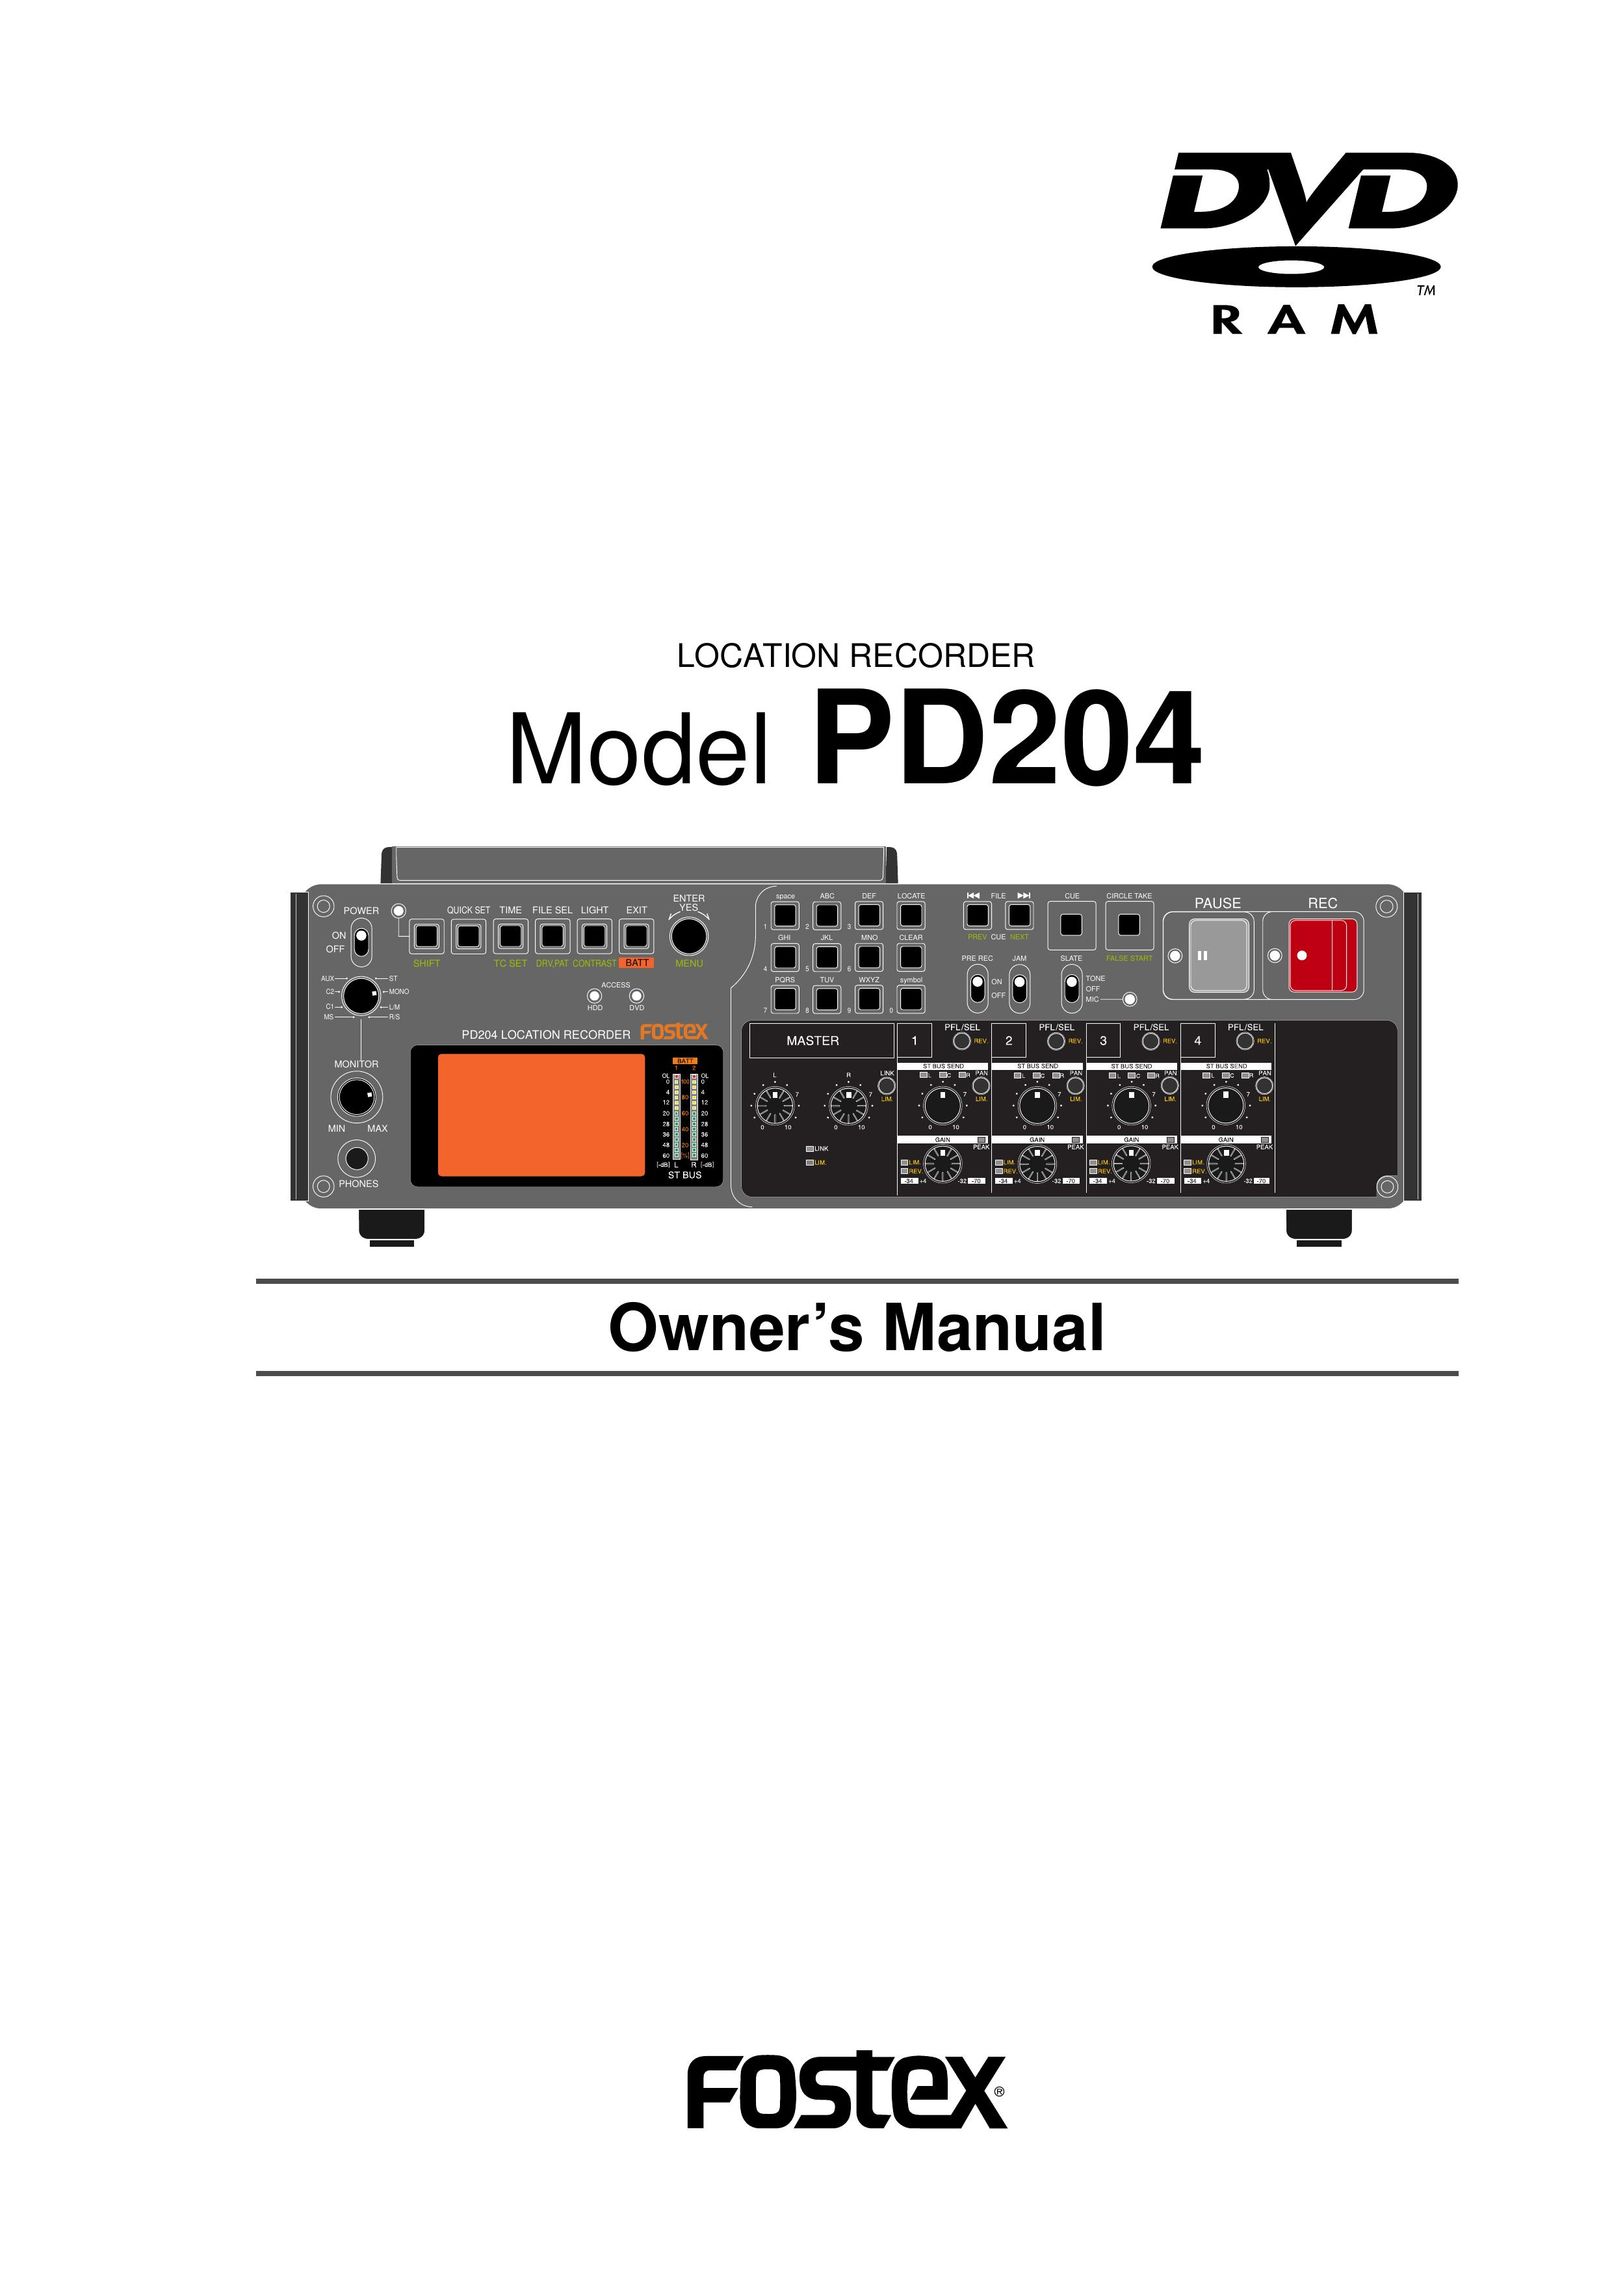 Fostex PD204 DVD Recorder User Manual (Page 1)